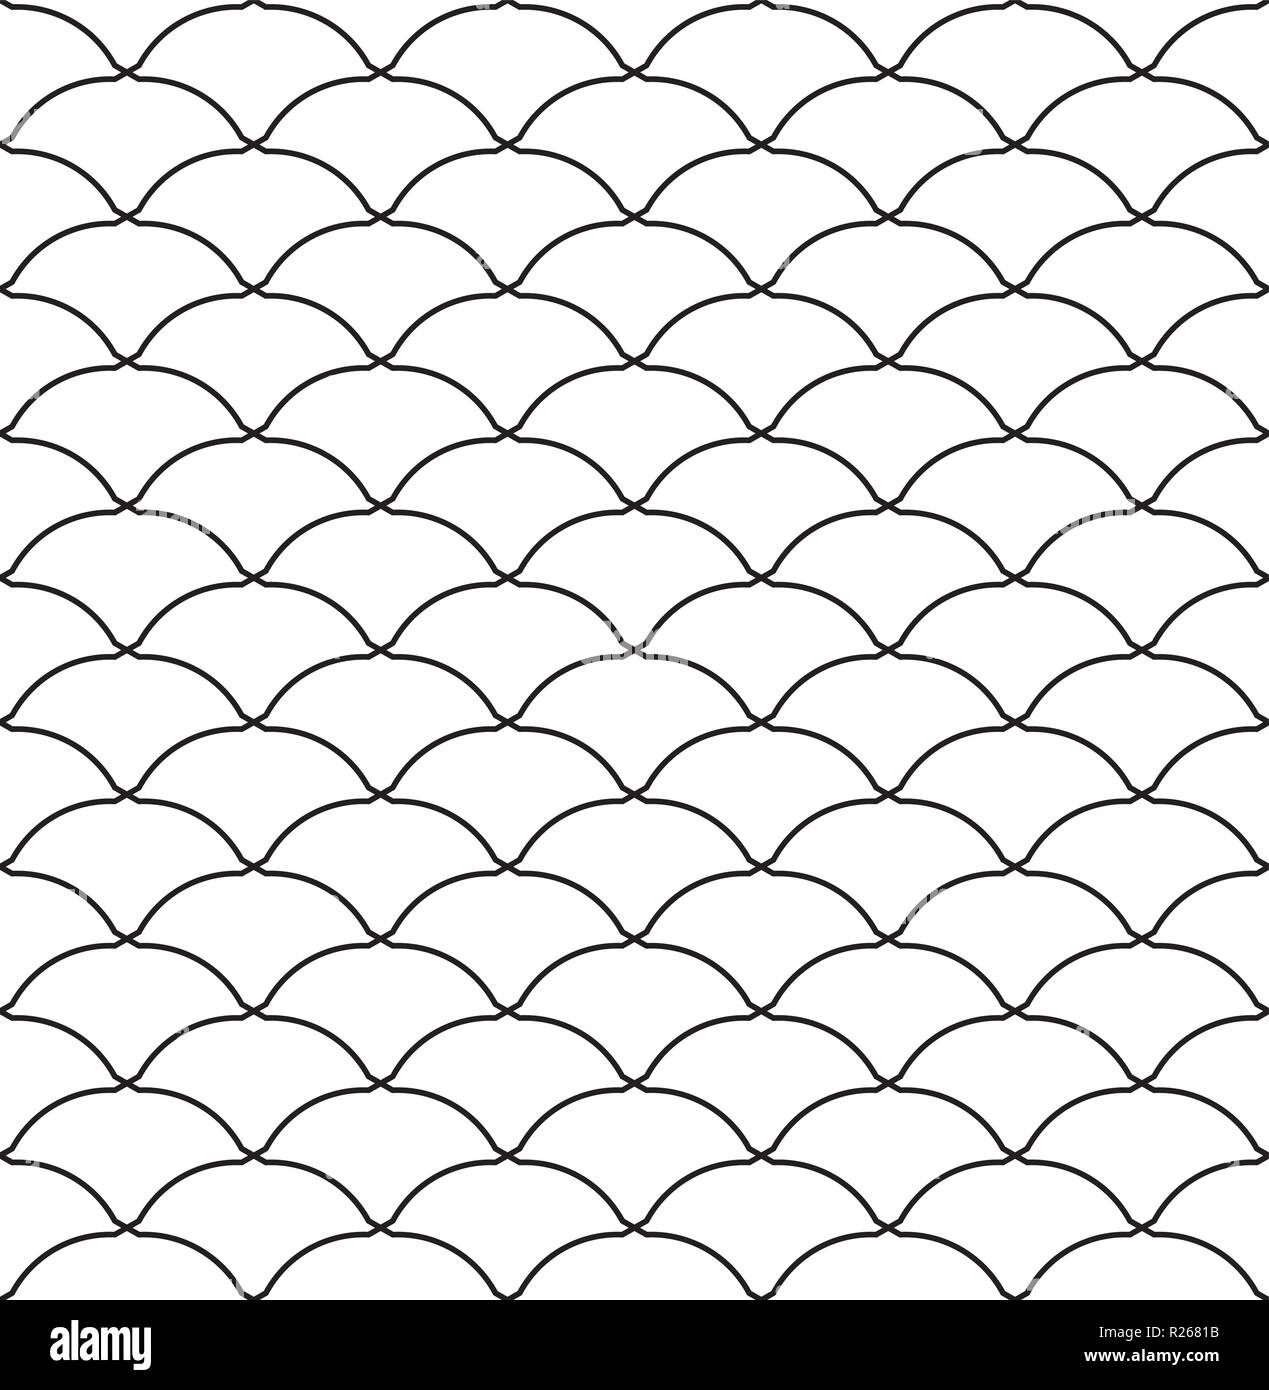 Seamless pattern based on Kumiko ornament .Black and white lines.Suitable for laser cutting and design. Stock Vector